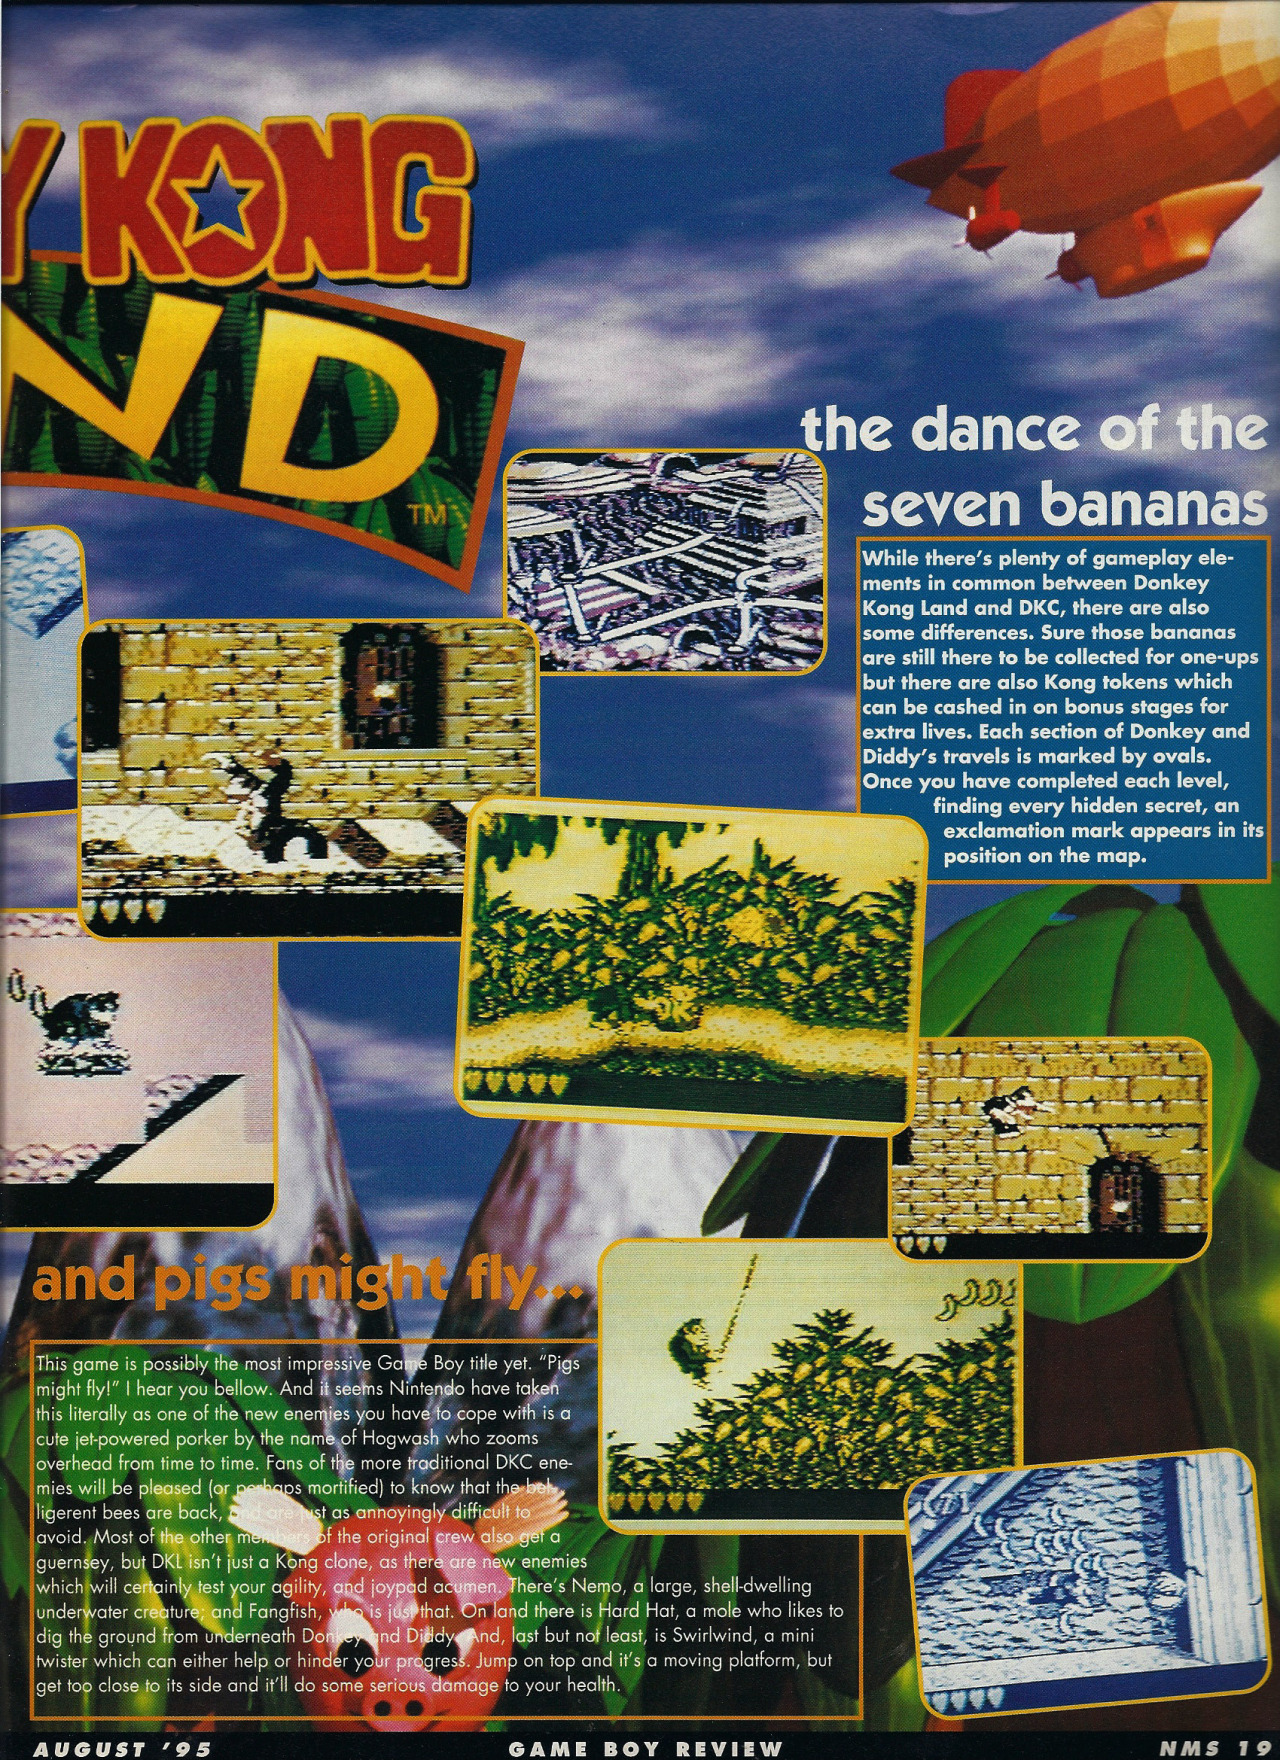 Their review of Donkey Kong Land on the Game Boy, giving it 96 / 100